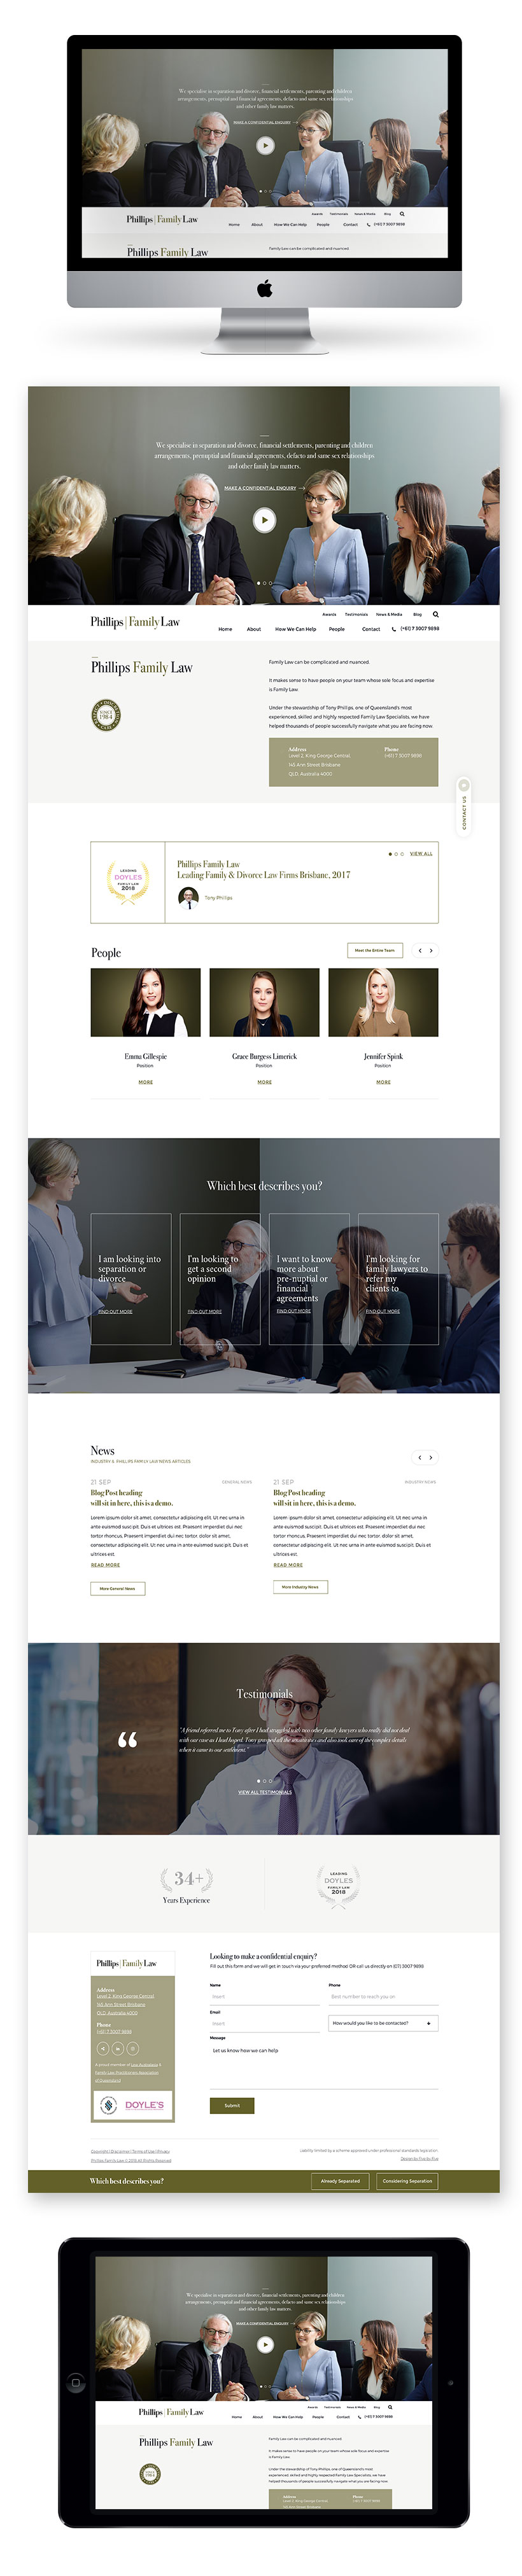 Phillips Family Law Site